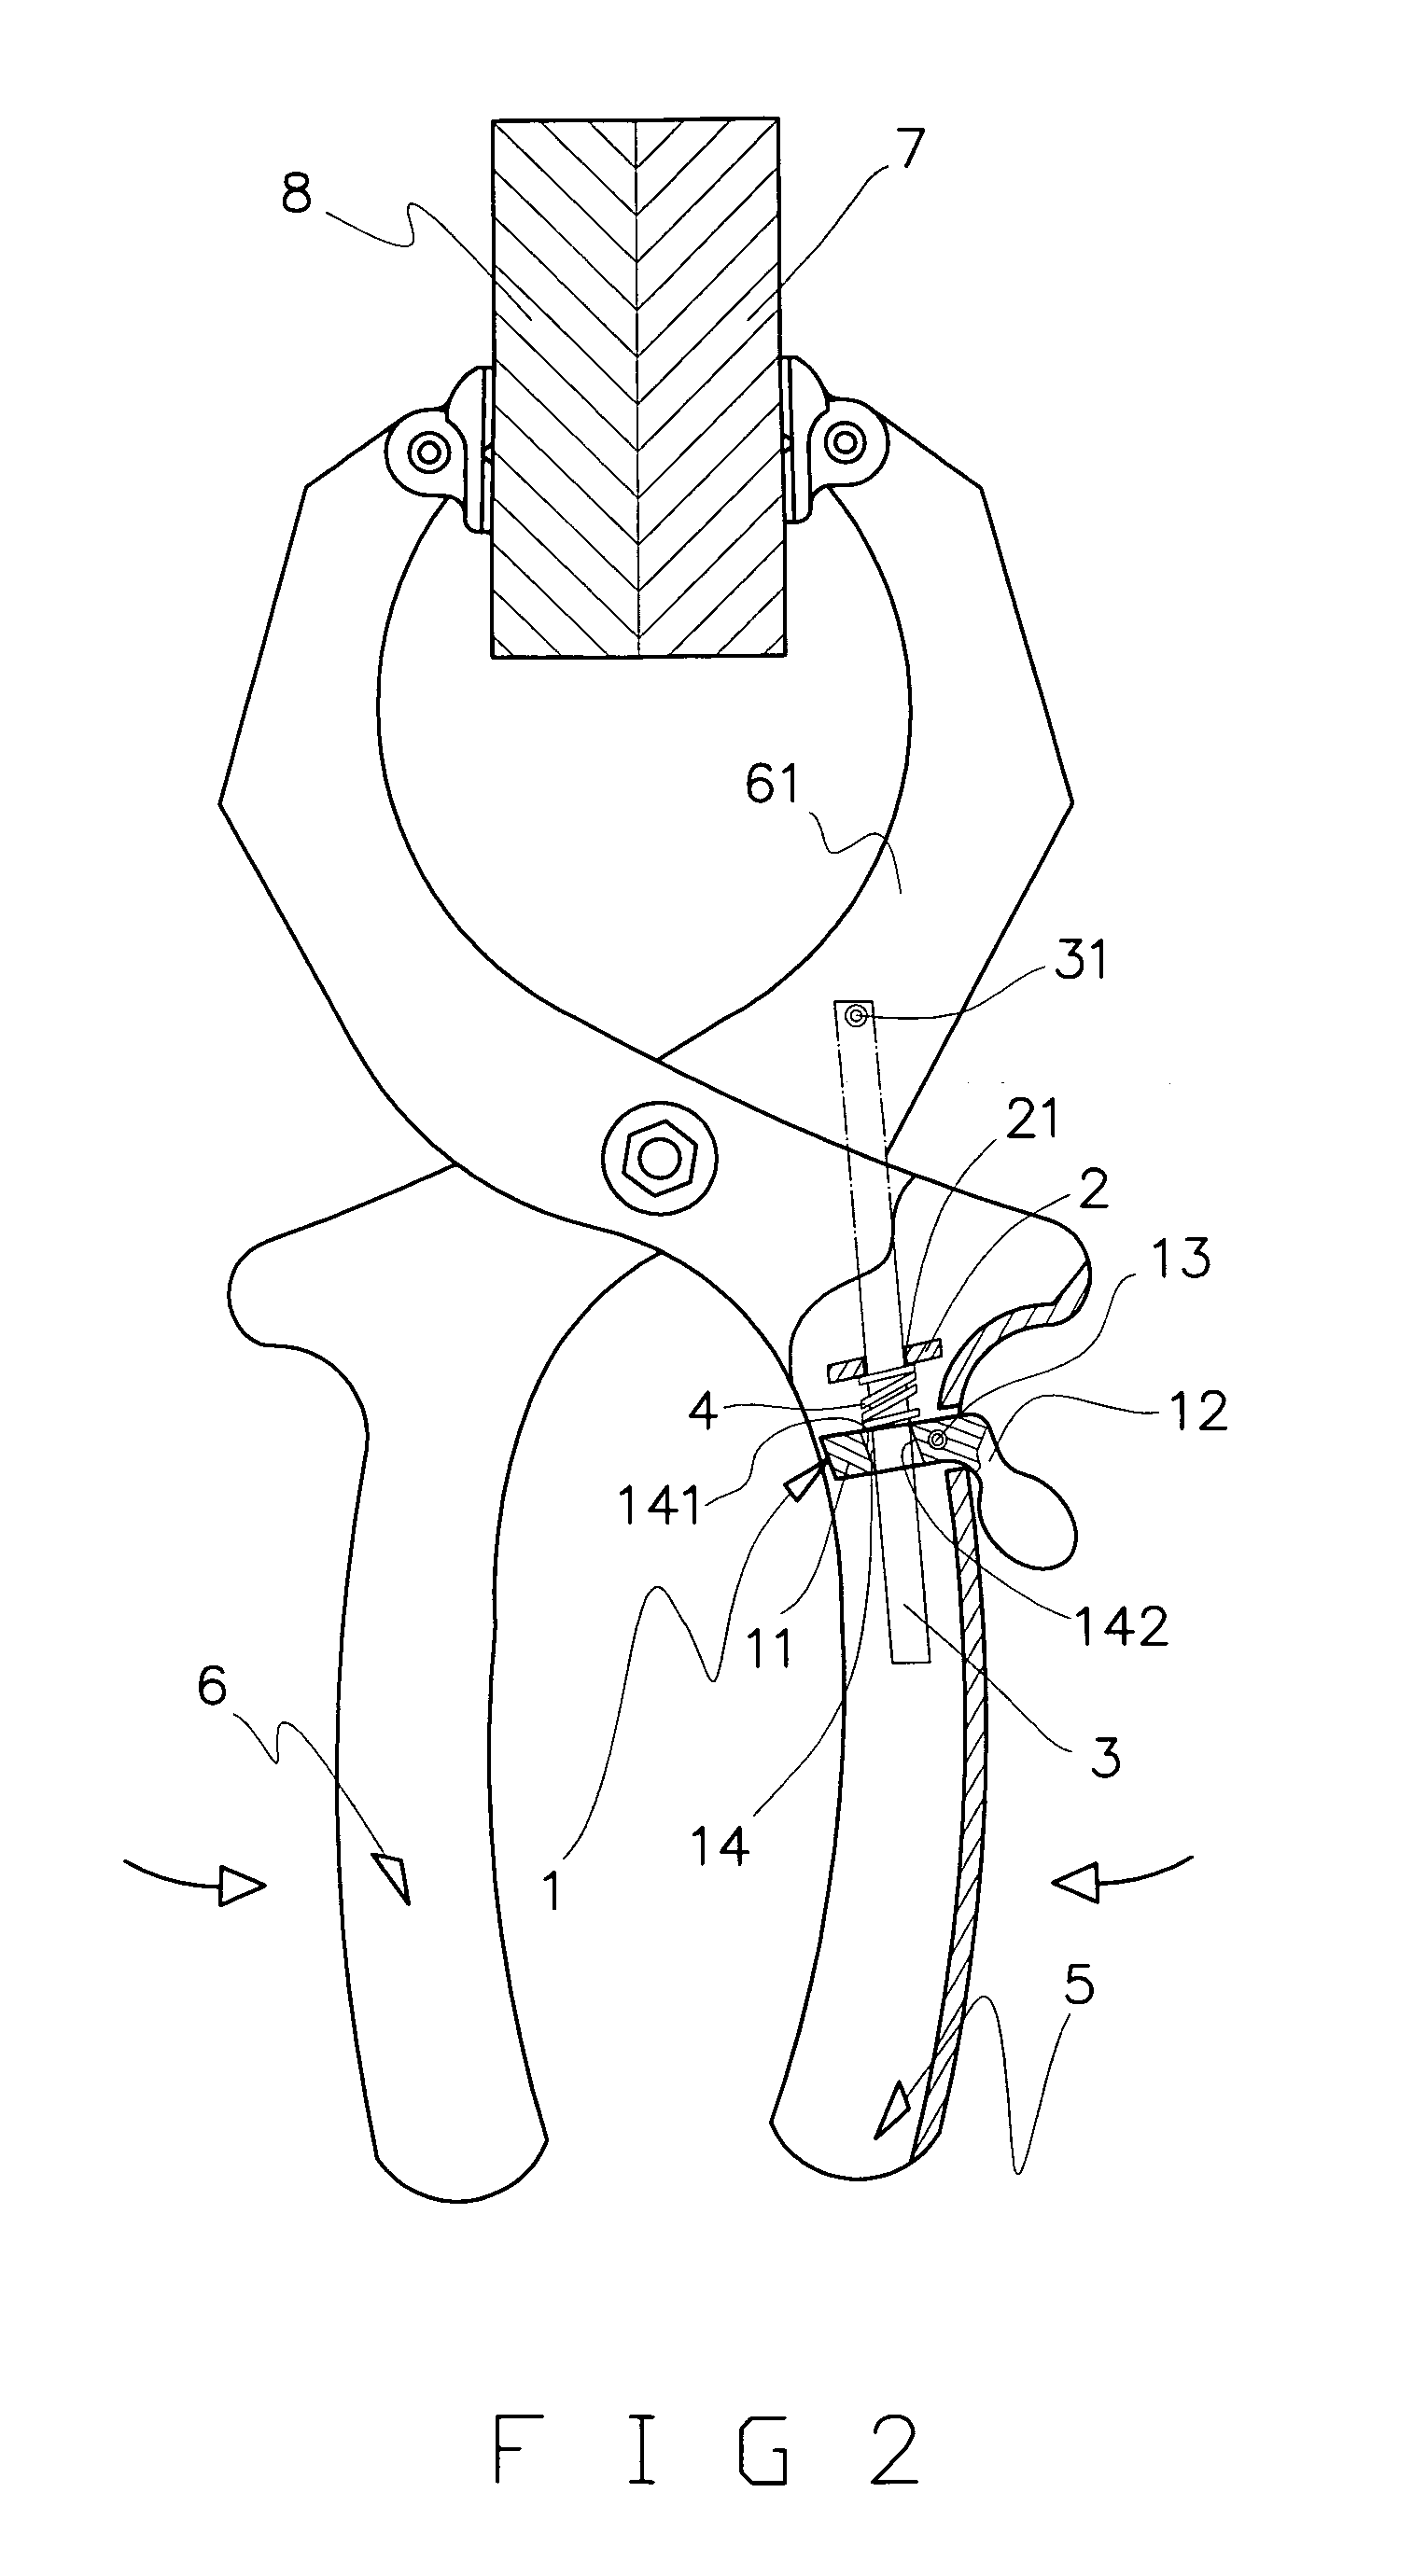 Spring clamp